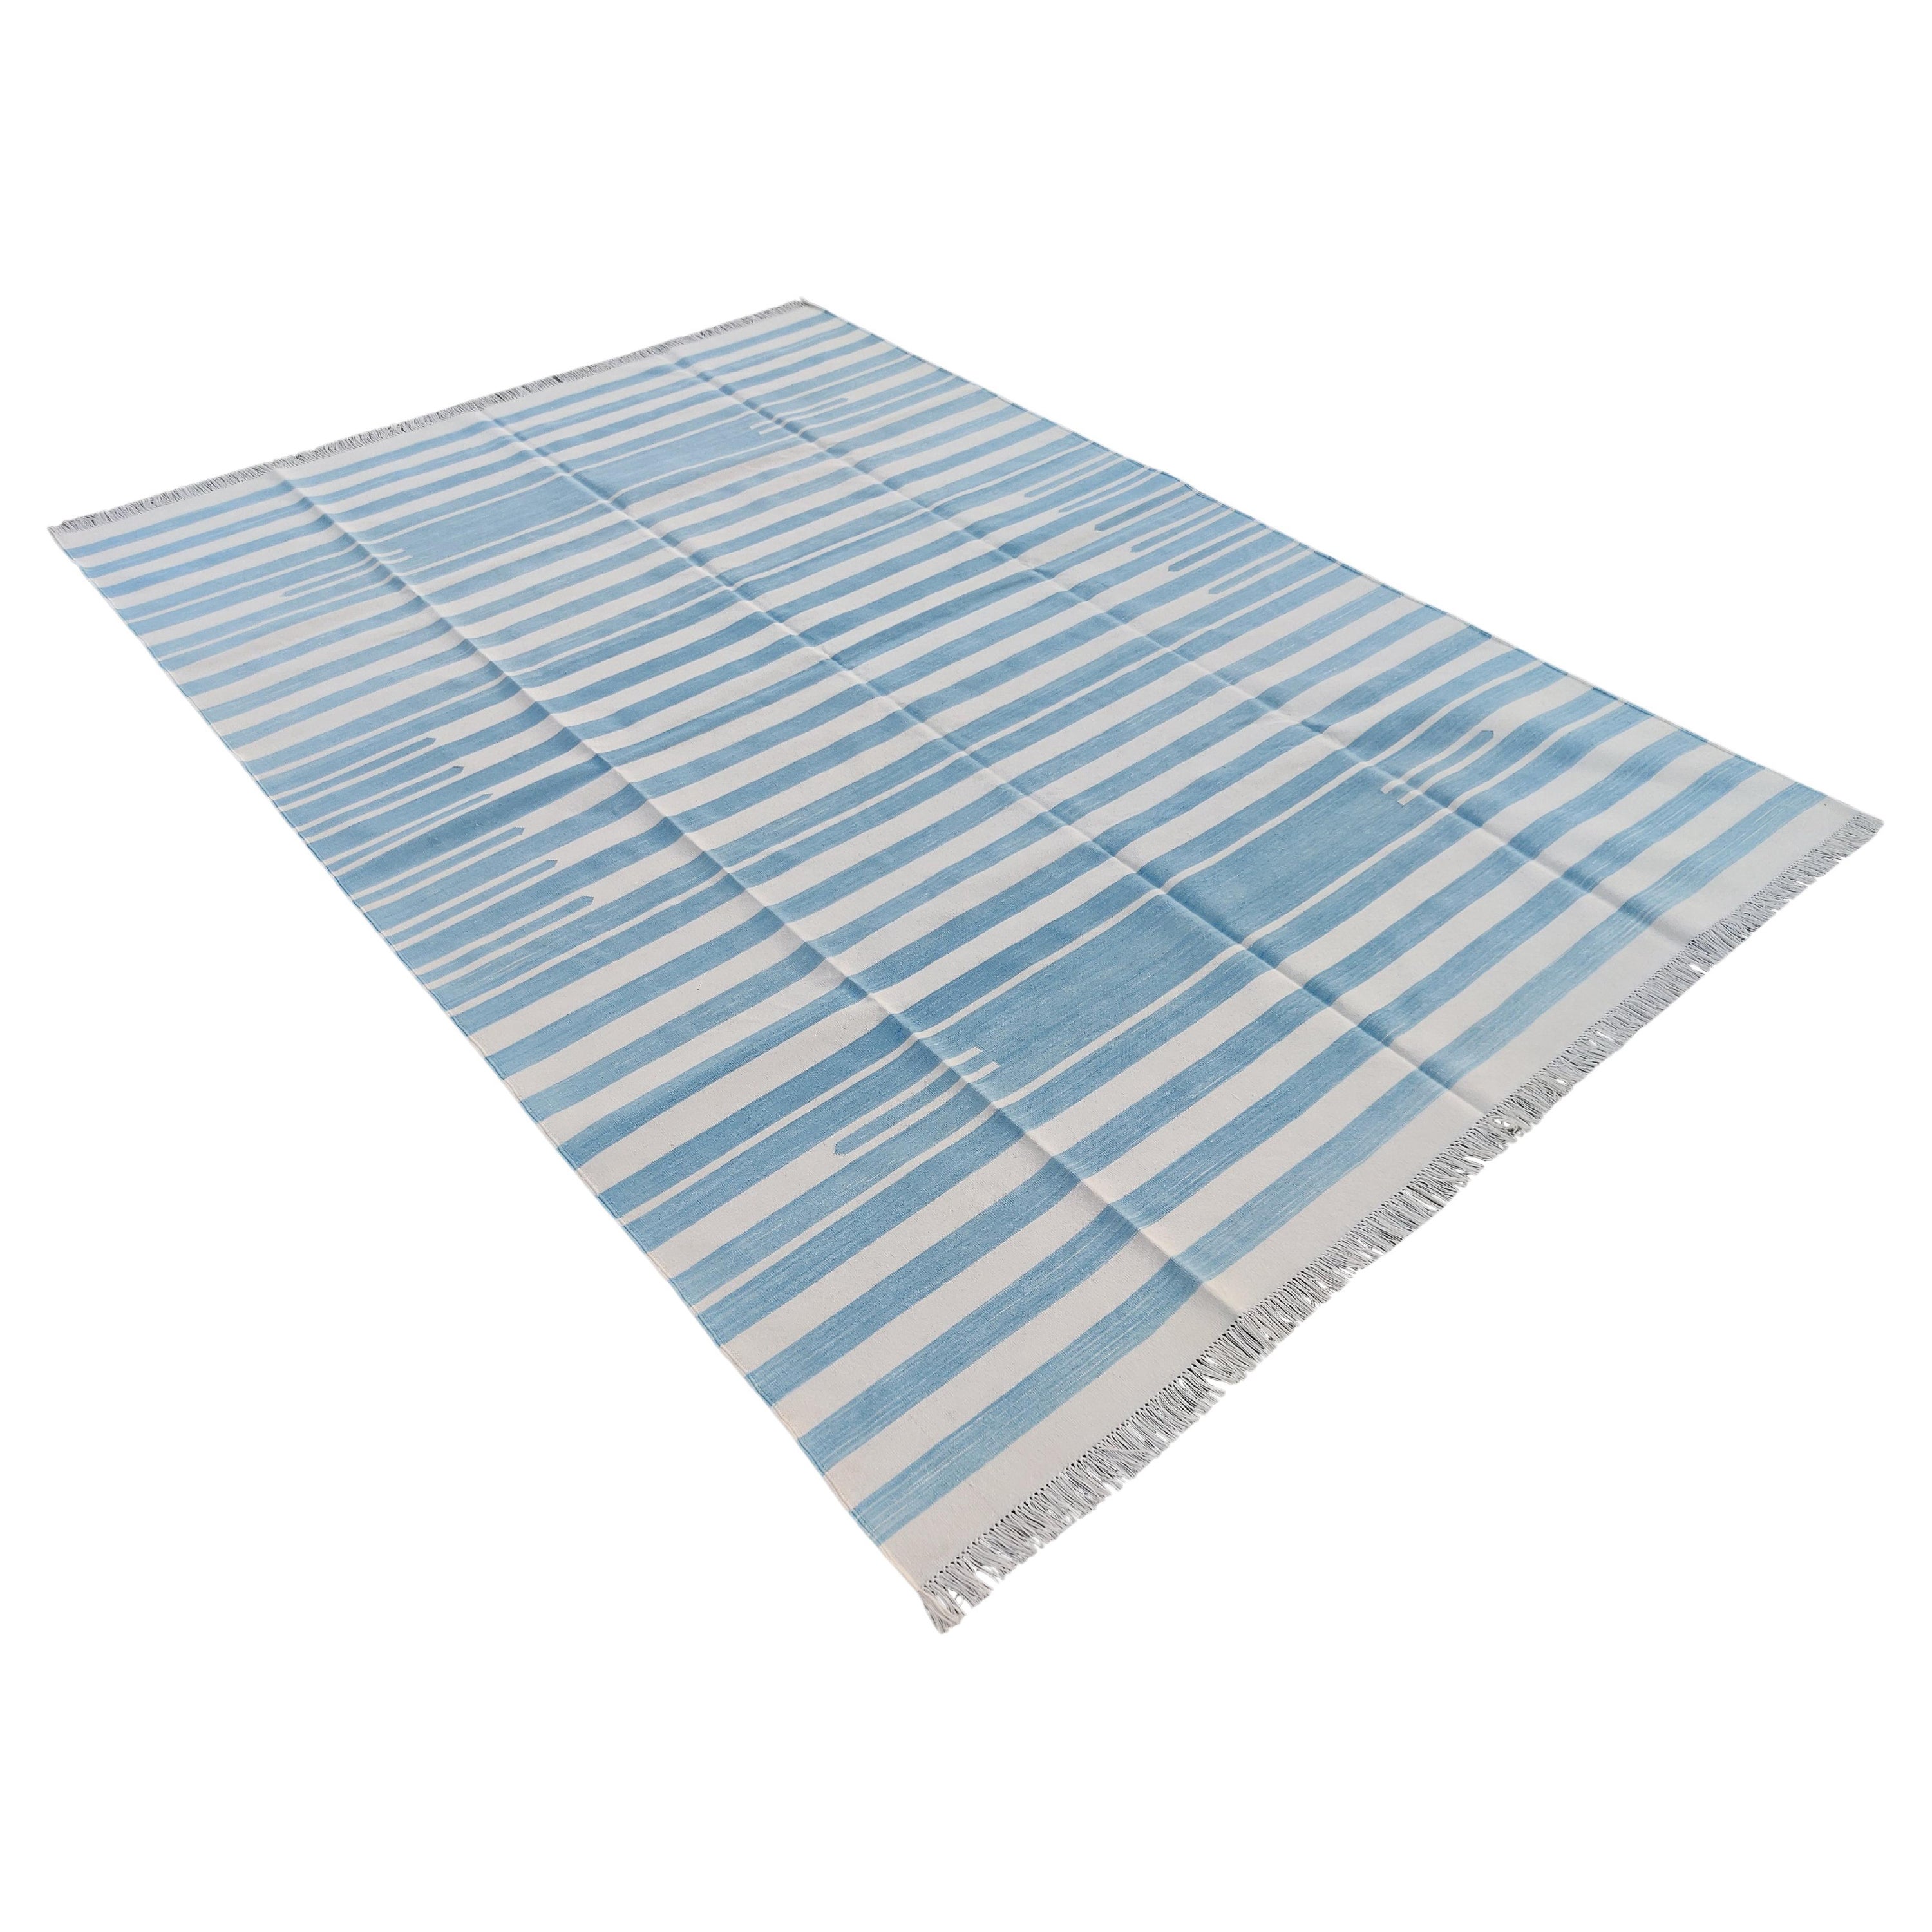 Handmade Cotton Area Flat Weave Rug, 5x8 Sky Blue, White Striped Indian Dhurrie